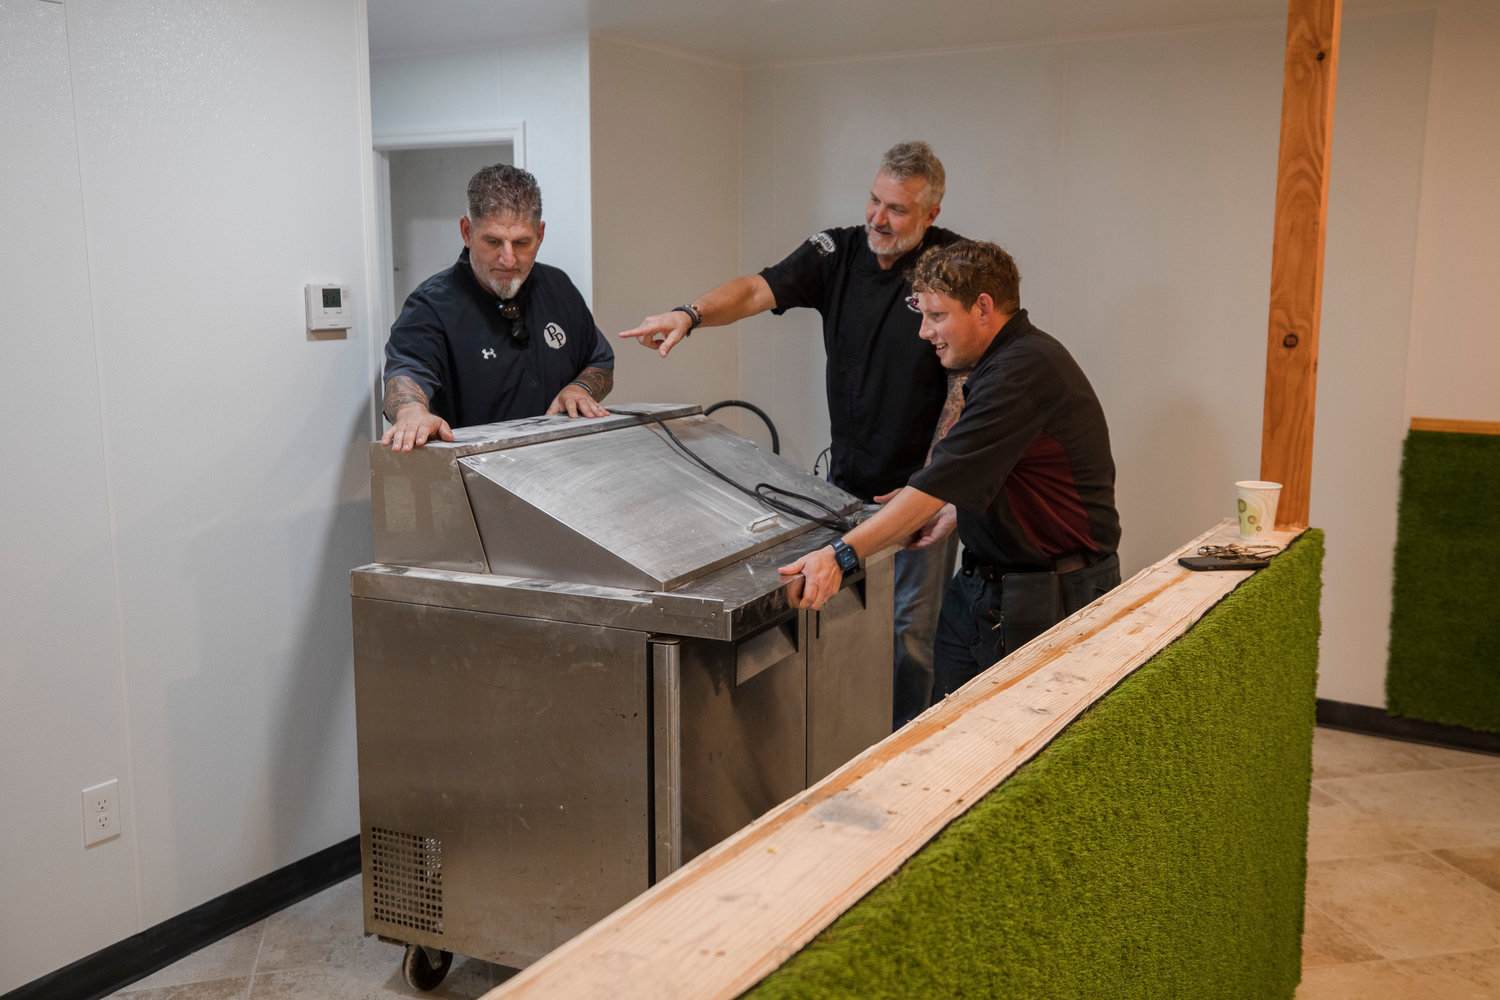 (From left) Nick Dimario, Pete Blohme and Johnny Stewart work inside the future Fairhope Squeeze Juice Bar and Fruiteria.